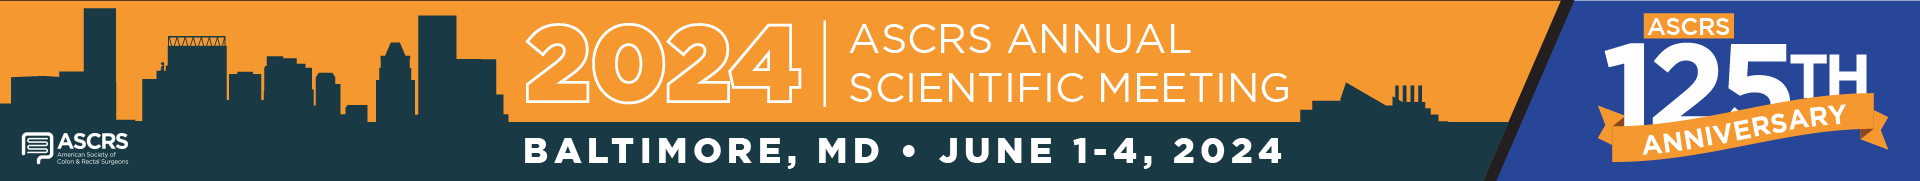 ASCRS 2024 Annual Scientific Meeting Call for Abstracts Event Banner